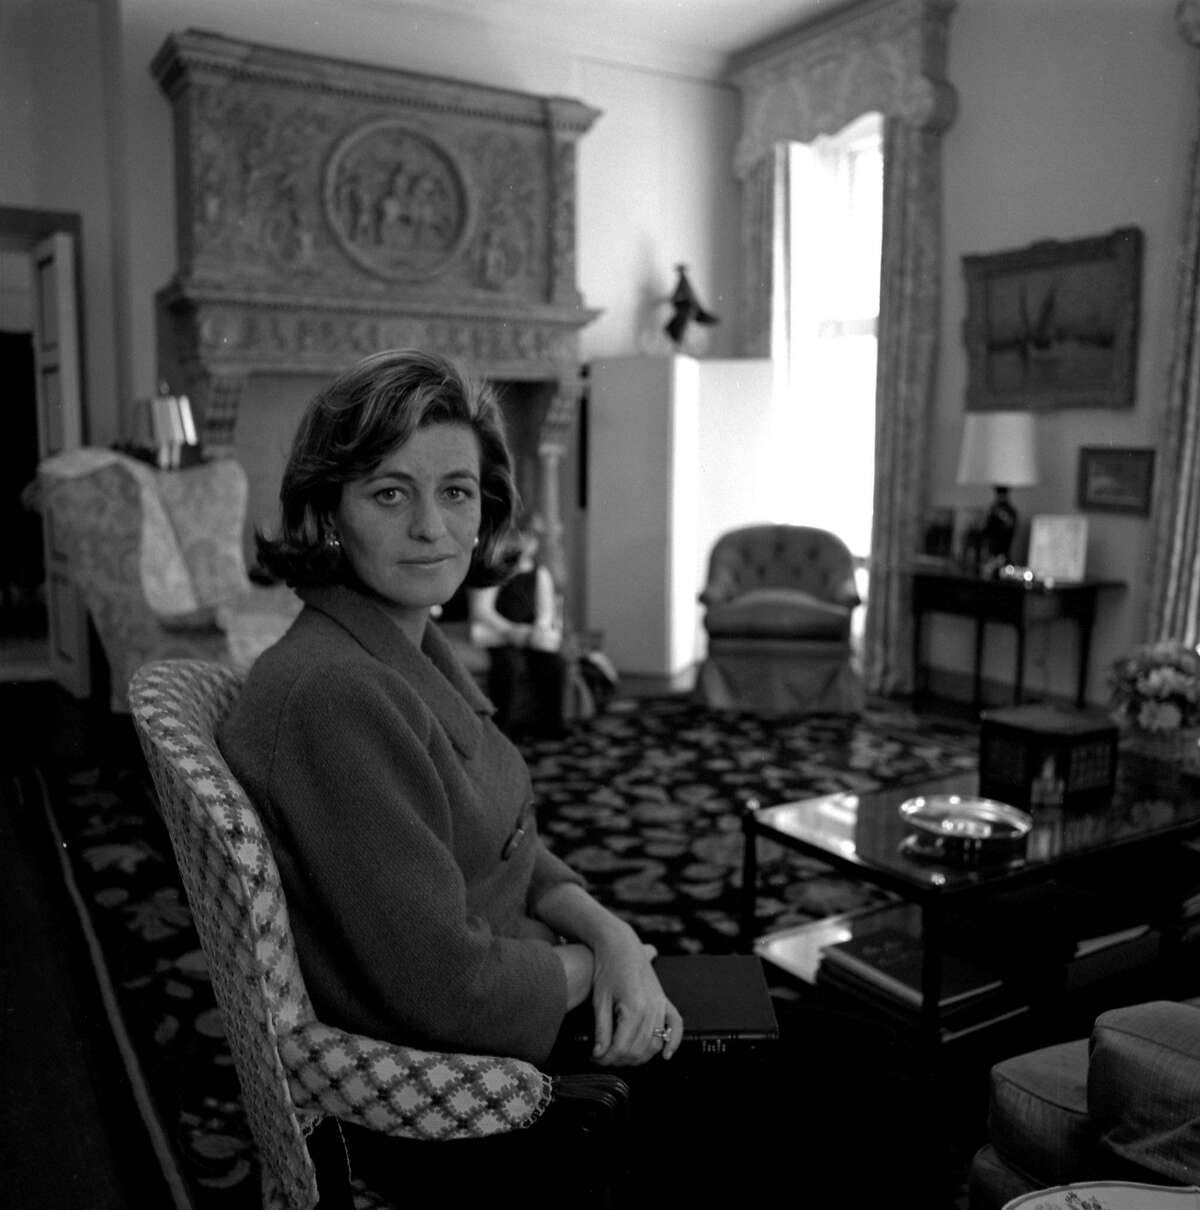 This handout picture provided by the John F. Kennedy Library Foundation shows a portrait of Jean Kennedy Smith seated in a chair with a book resting in her lap on February 16, 1965. - US President John F. Kennedy's last surviving sibling, Jean Kennedy Smith -- who was instrumental in bringing peace to Northern Ireland -- has died aged 92. Smith, who served as US ambassador to Ireland in the 1990s, passed away on June 17, 2020, at her home in Manhattan, The New York Times said. (Photo by Arthur Stettner / John F. Kennedy Library Foundation / AFP) / RESTRICTED TO EDITORIAL USE - MANDATORY MENTION OF THE ARTIST UPON PUBLICATION - MANDATORY CREDIT "AFP PHOTO /John F. Kennedy Library Foundation" - TO ILLUSTRATE THE EVENT AS SPECIFIED IN THE CAPTION - NO MARKETING NO ADVERTISING CAMPAIGNS - DISTRIBUTED AS A SERVICE TO CLIENTS - NO ARCHIVE / (Photo by ARTHUR STETTNER/John F. Kennedy Library Foundati/AFP via Getty Images)